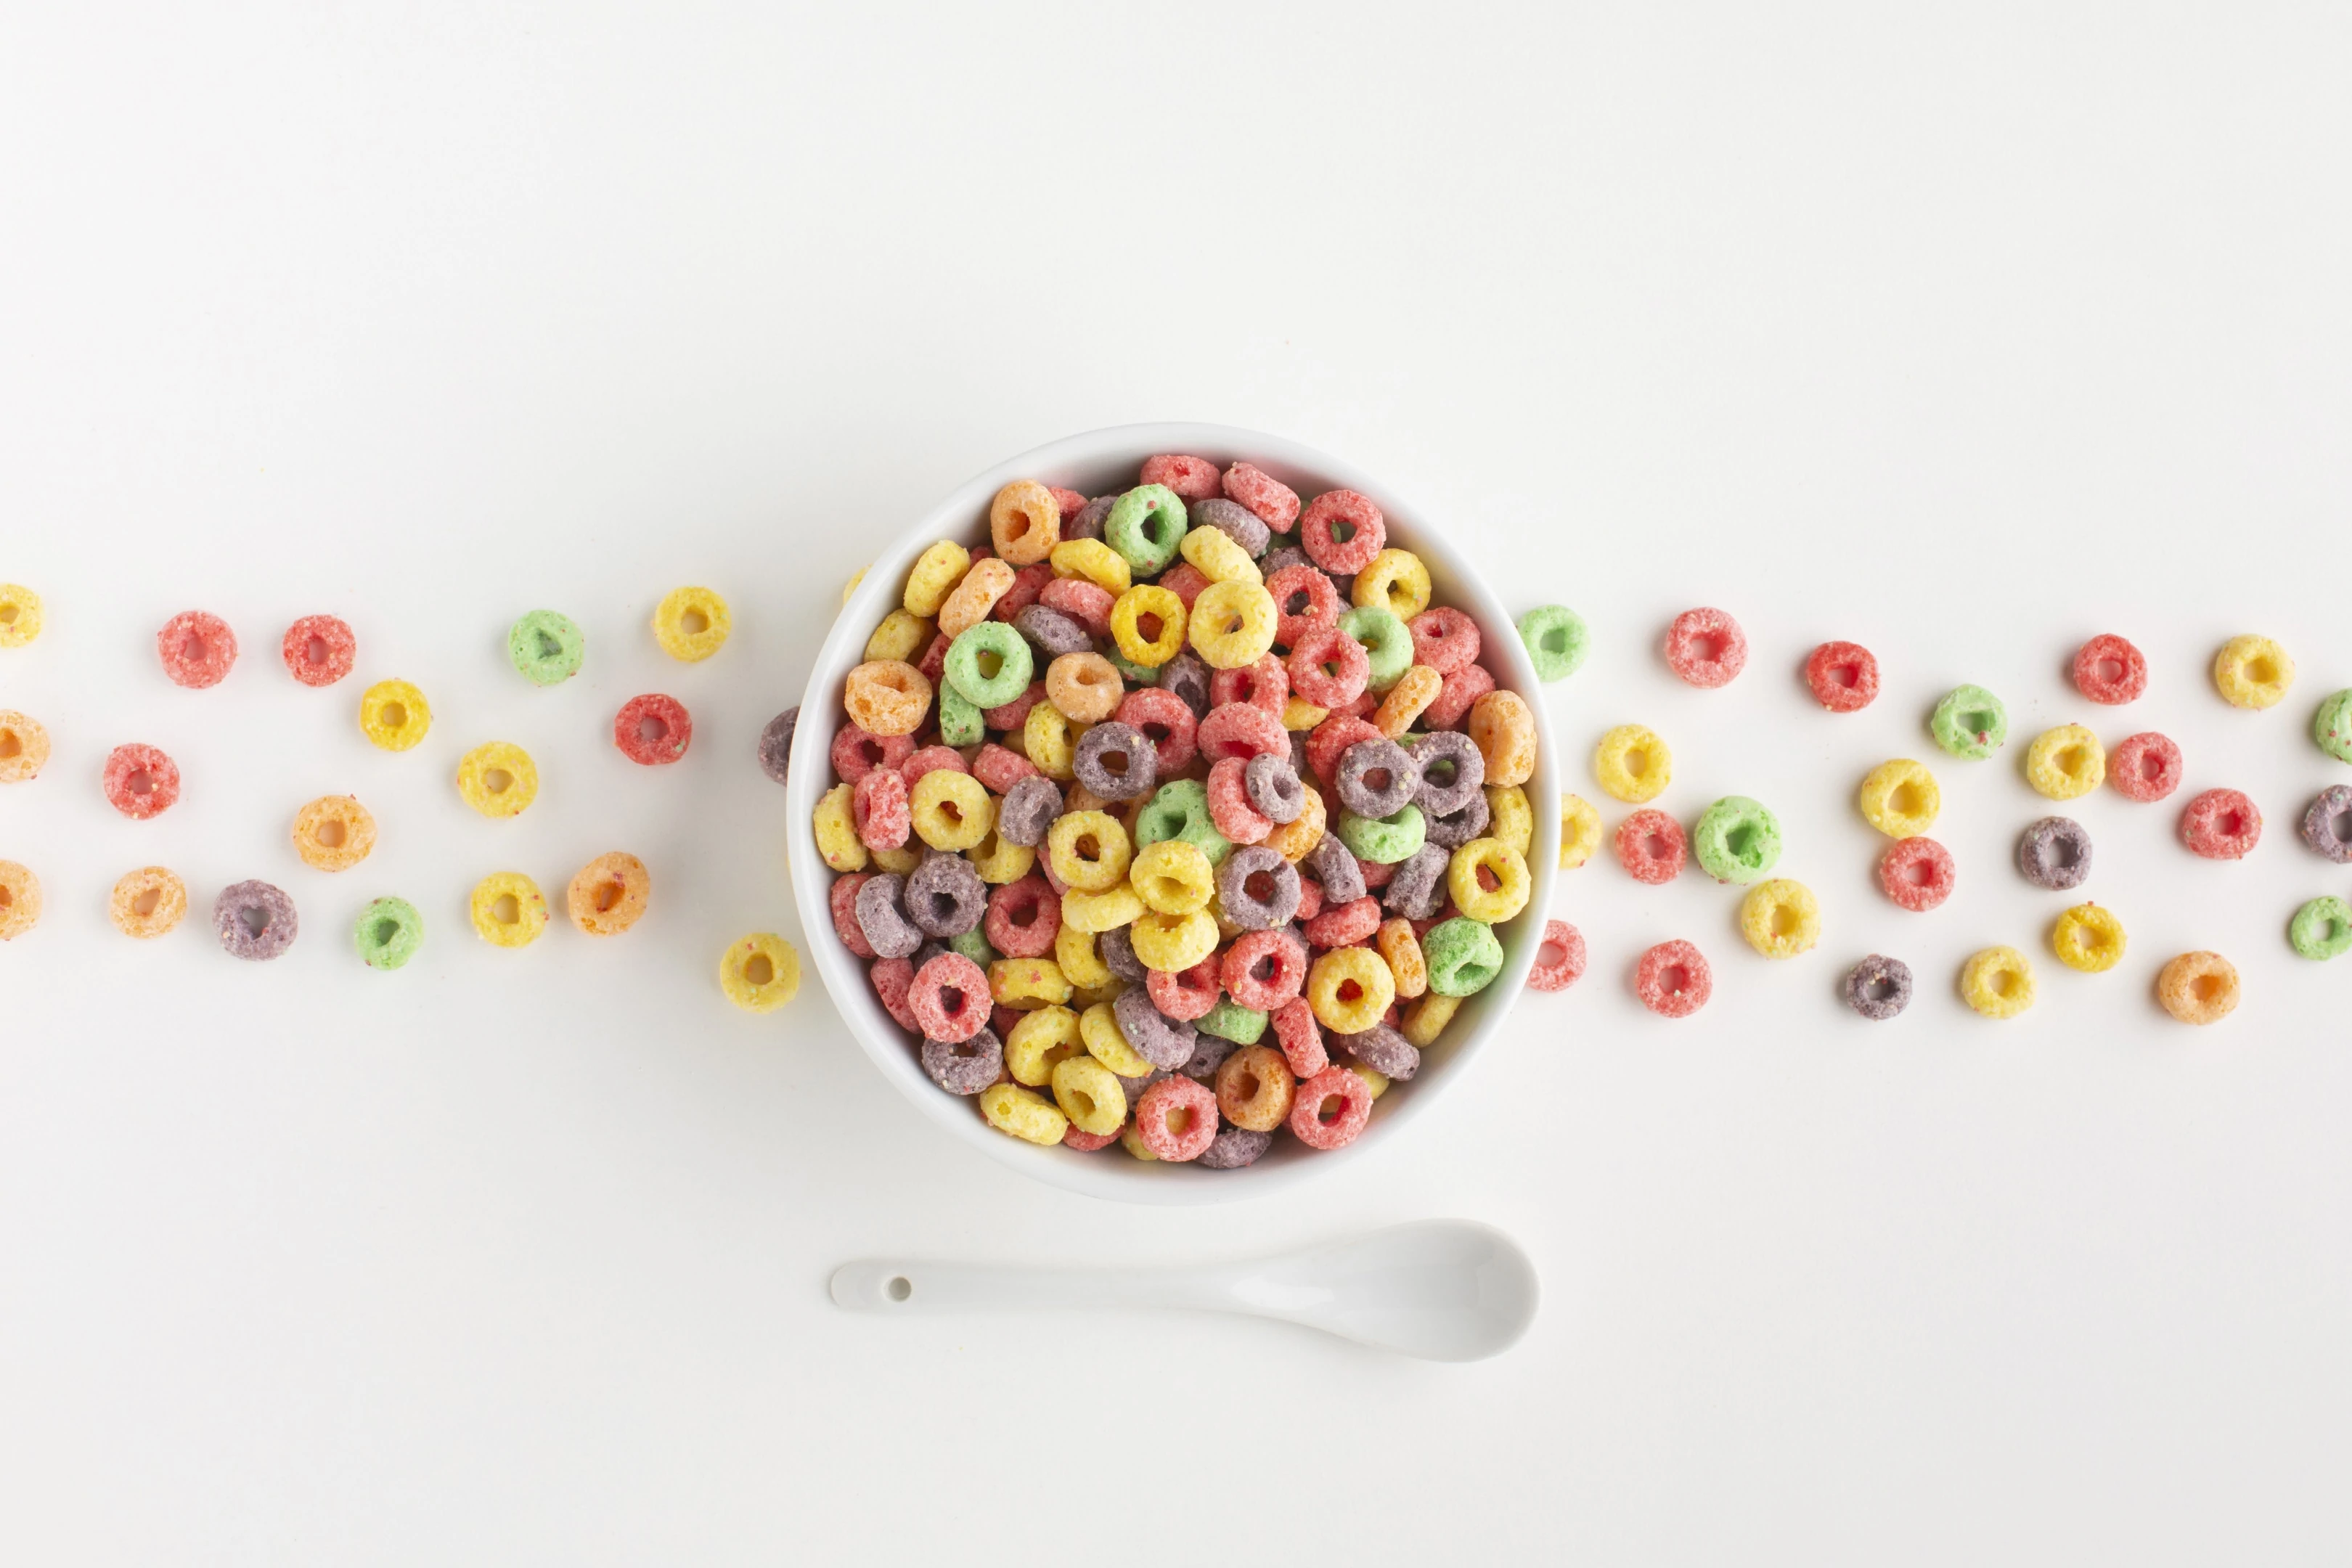 Arrangement of colorful and sweet cereal